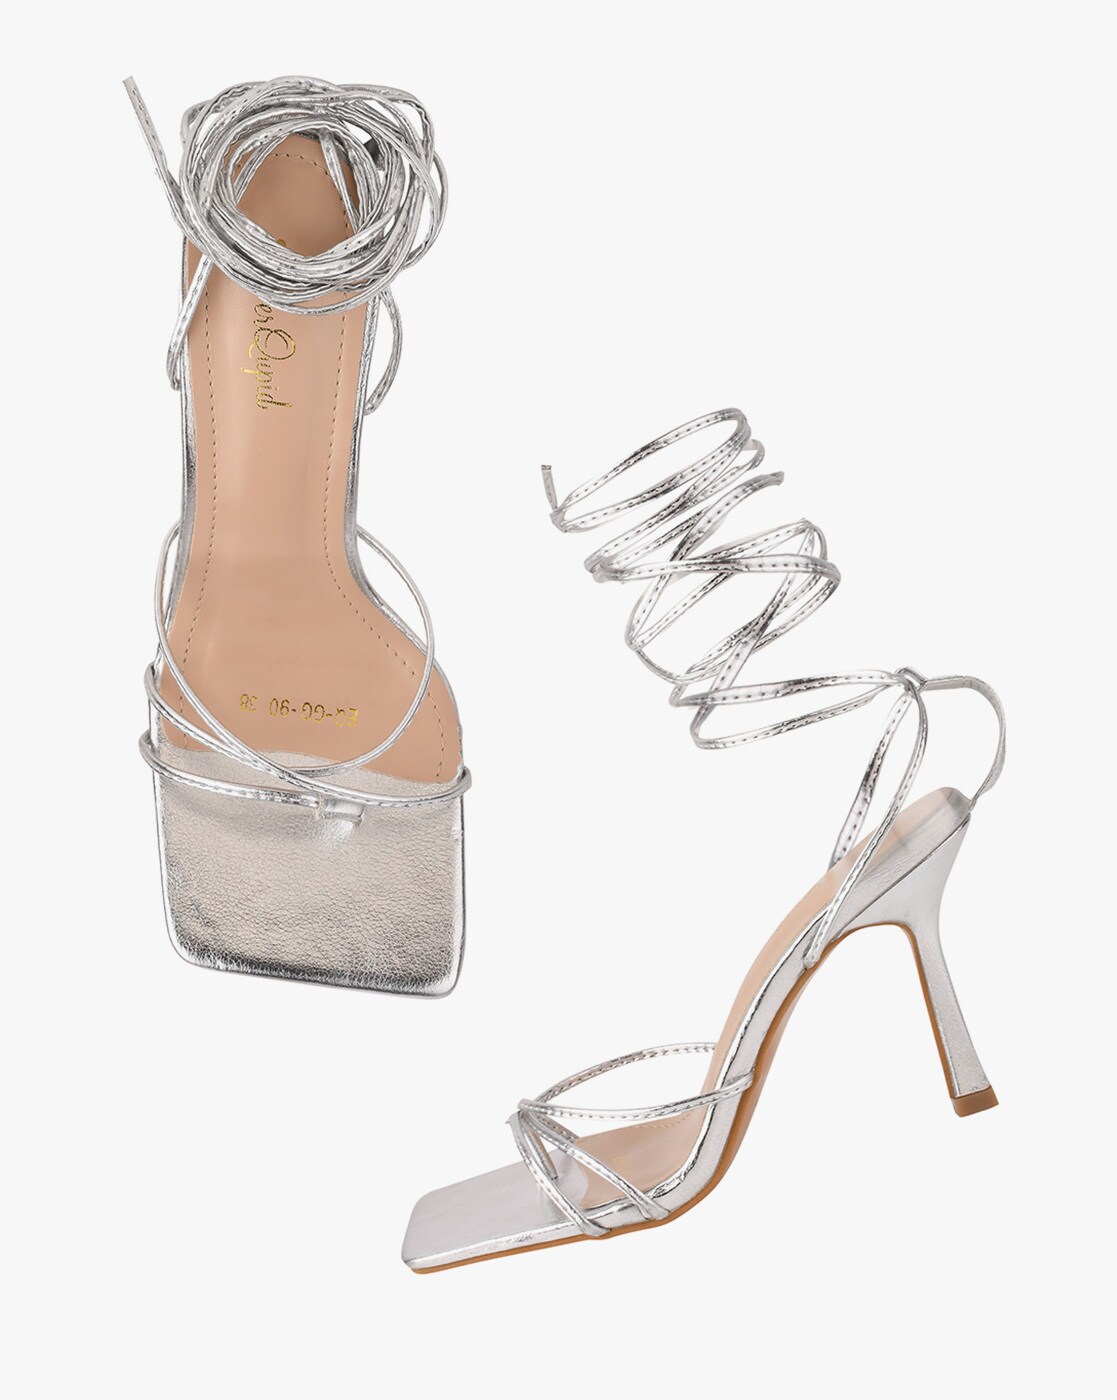 ₪155-Whnbnew Style Summer Transparent Women Sandals Crystal Clear Heeled  Female Party Prom Shoes High Heels Gladiator Sandals-Description